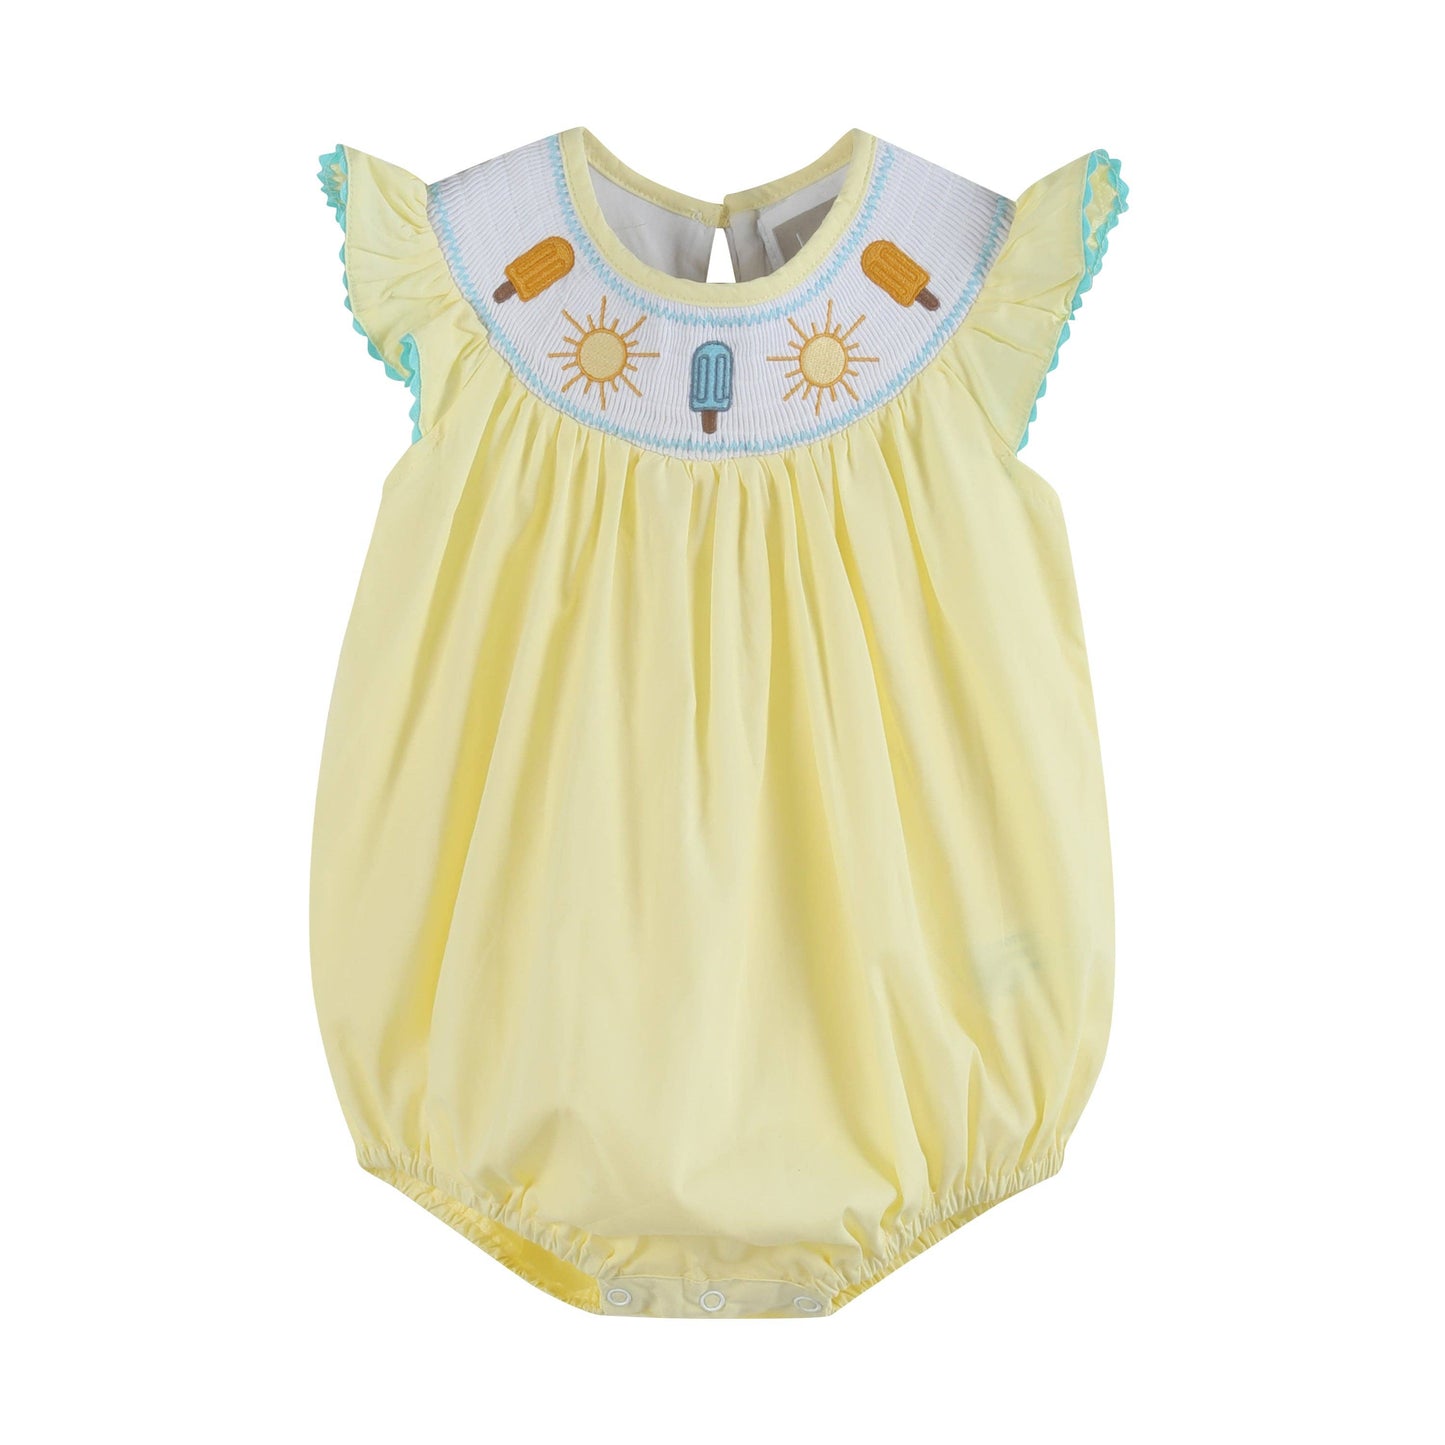 Lil Cactus - Yellow Popsicle Smocked Flutter Romper